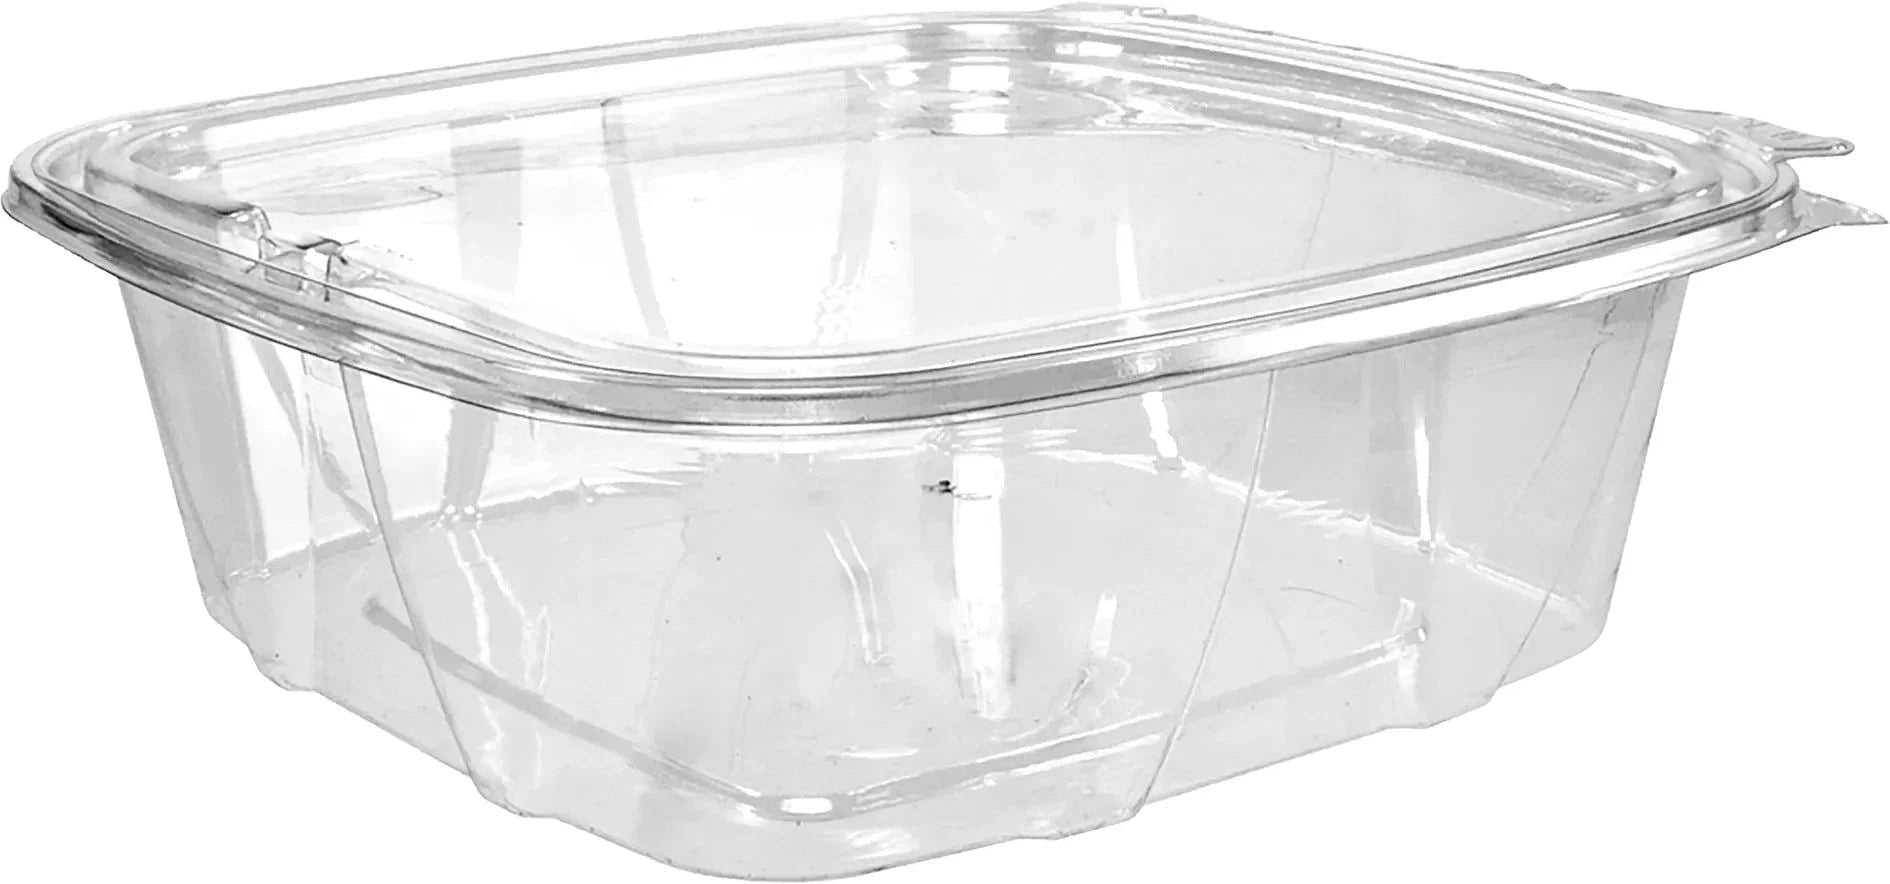 Dart Container - 48 Oz PET Plastic Tamper-Evident/Resistant Container with Clear Flat Lid - CH48DEF